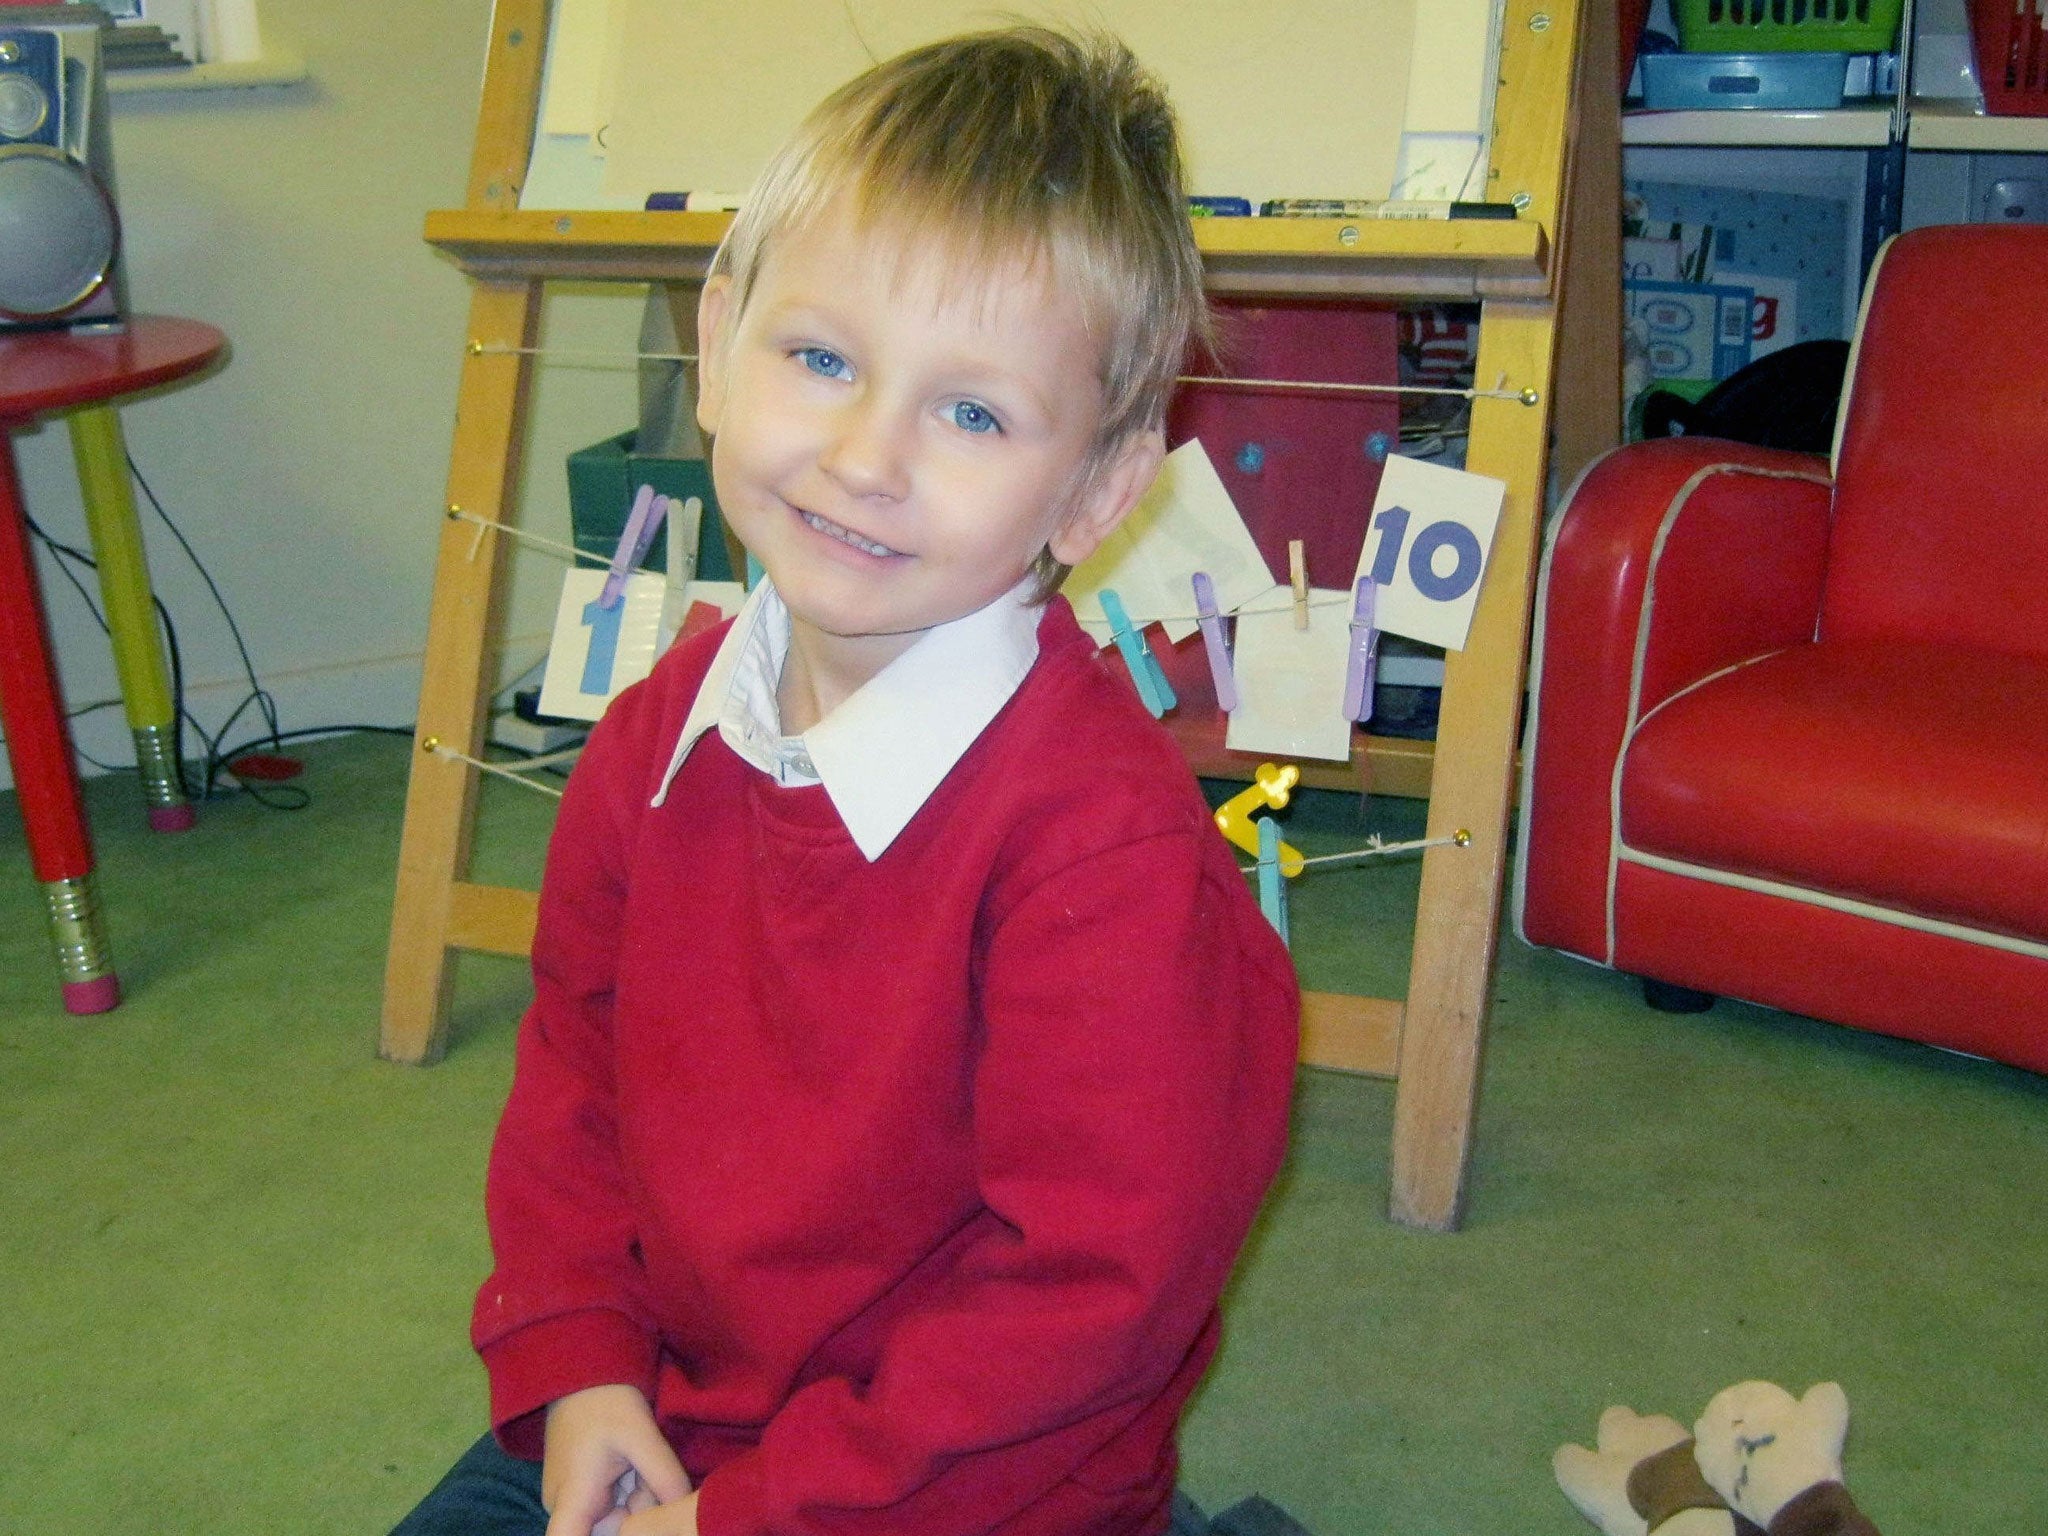 The charity says the death of Daniel Pelka exposed the lack of a joined-up approach